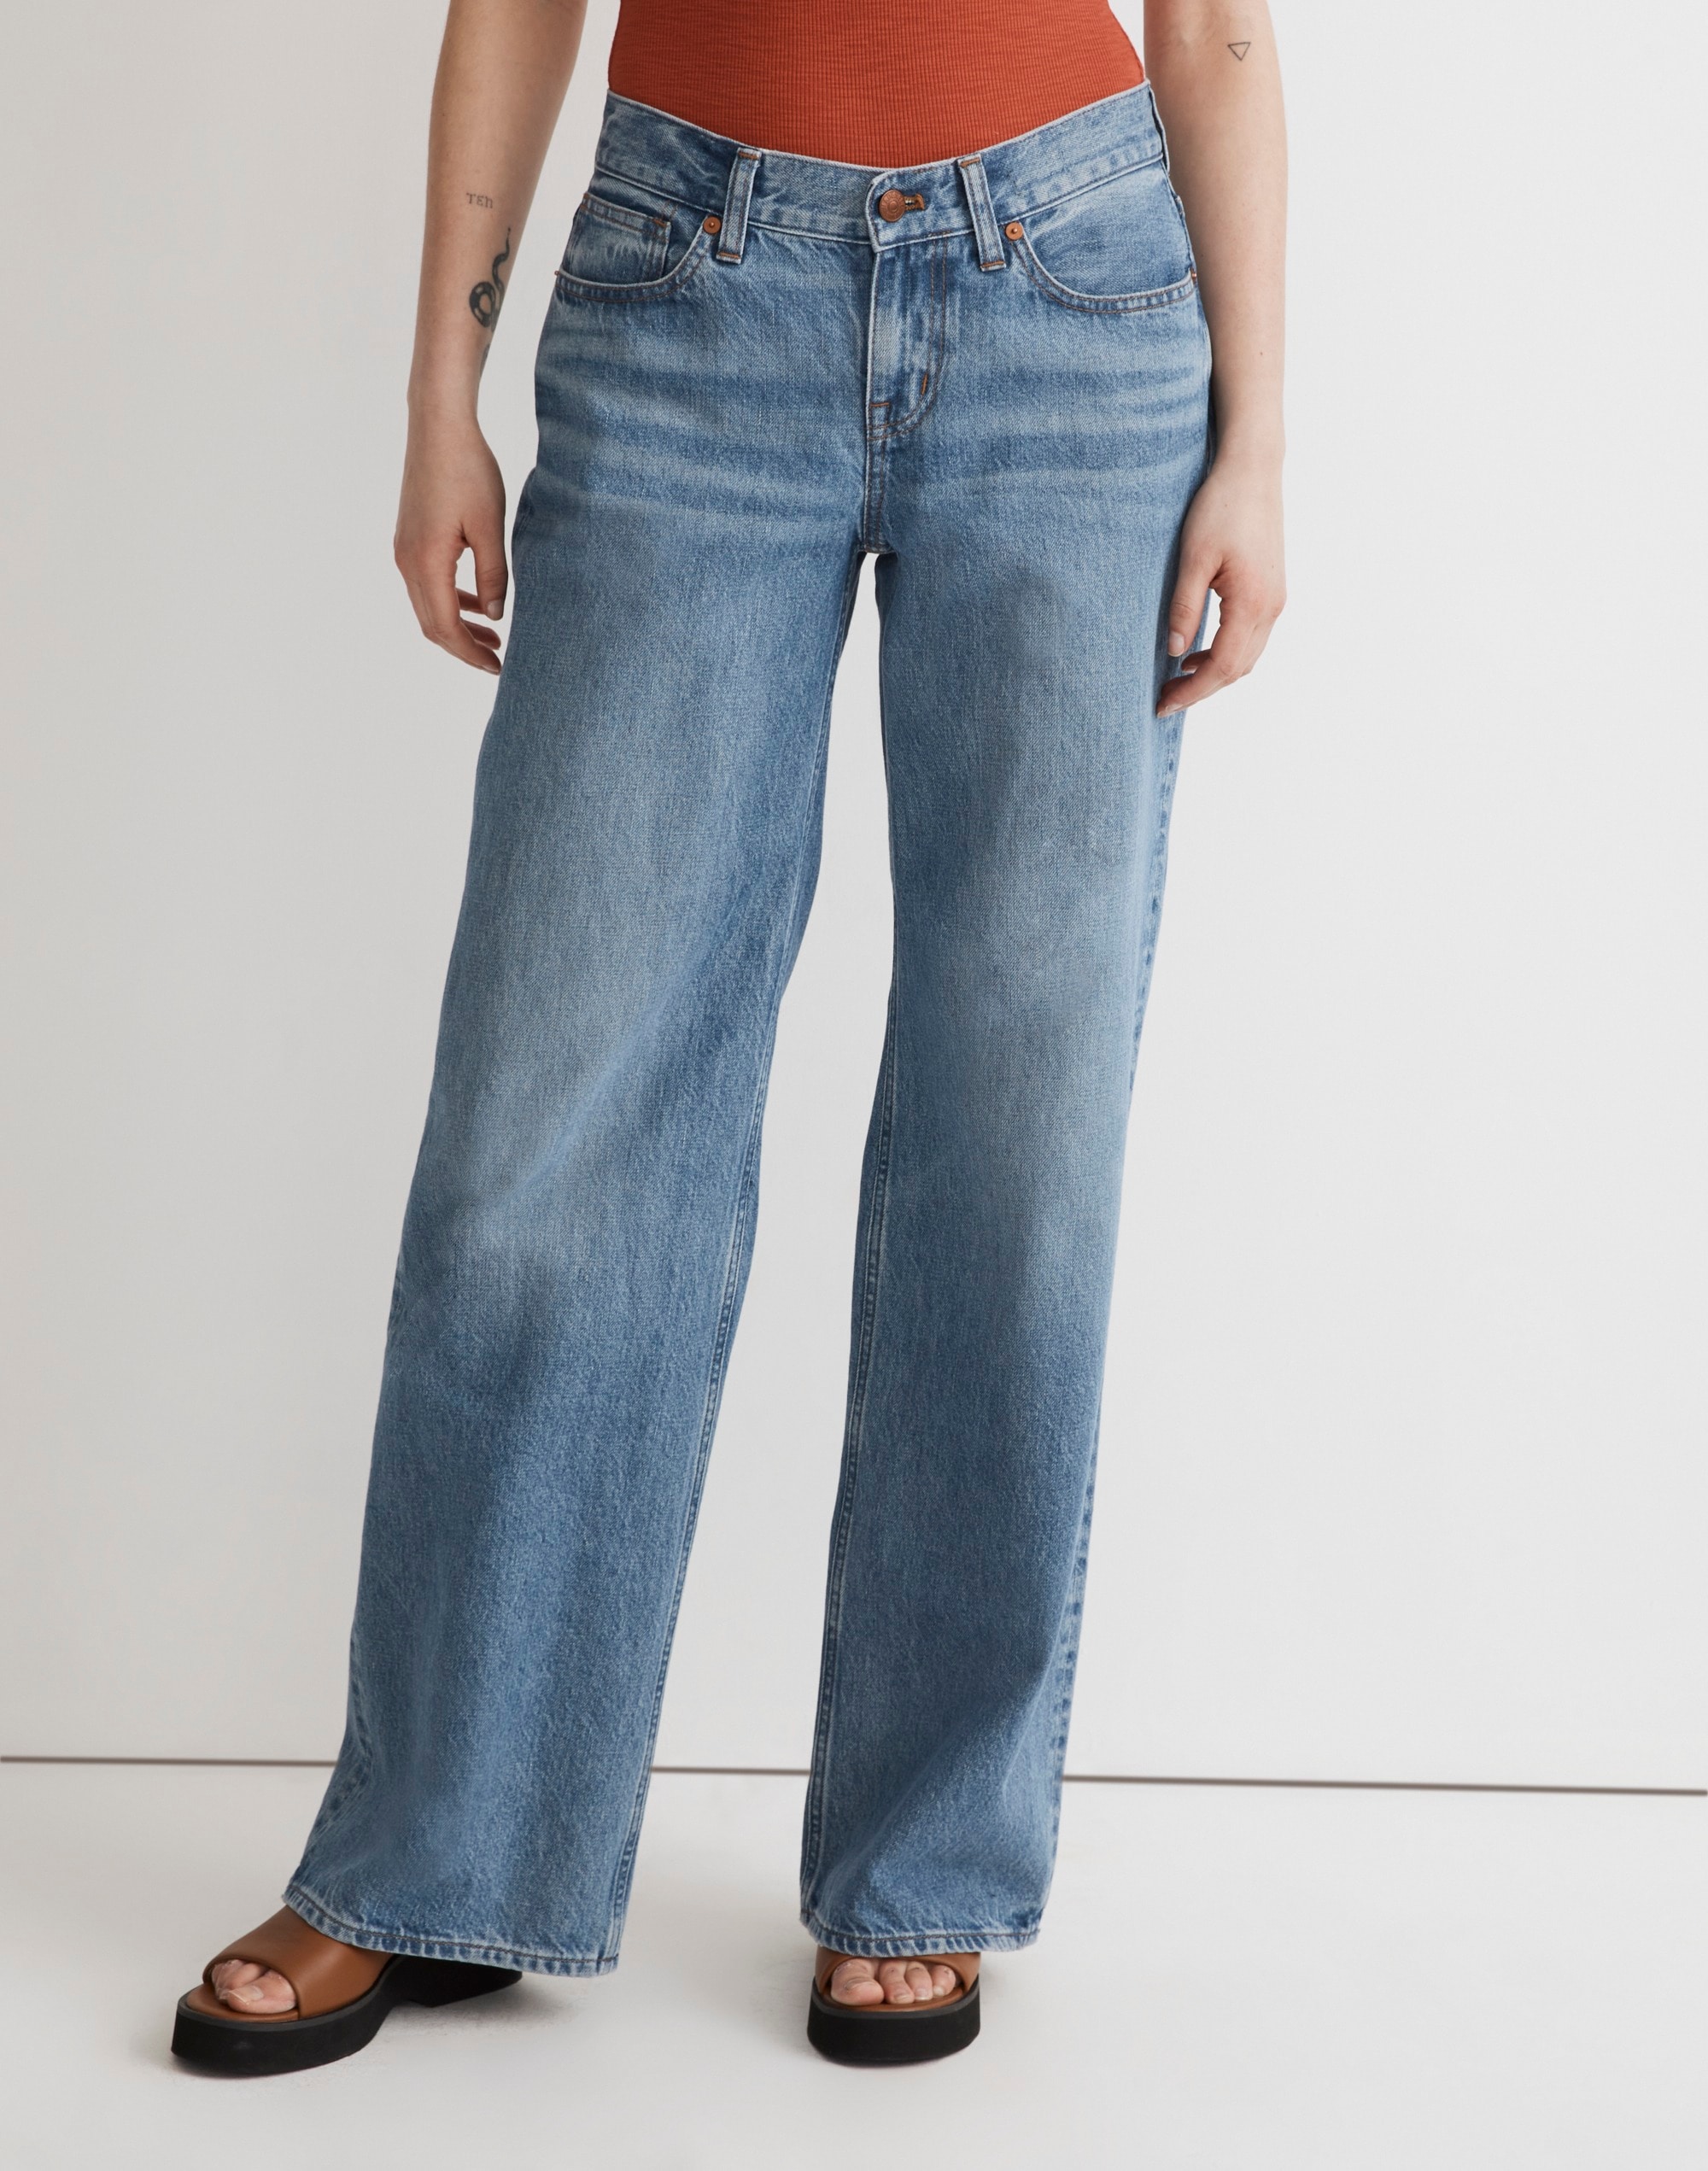 Low-Rise Superwide-Leg Jeans in Mainview Wash